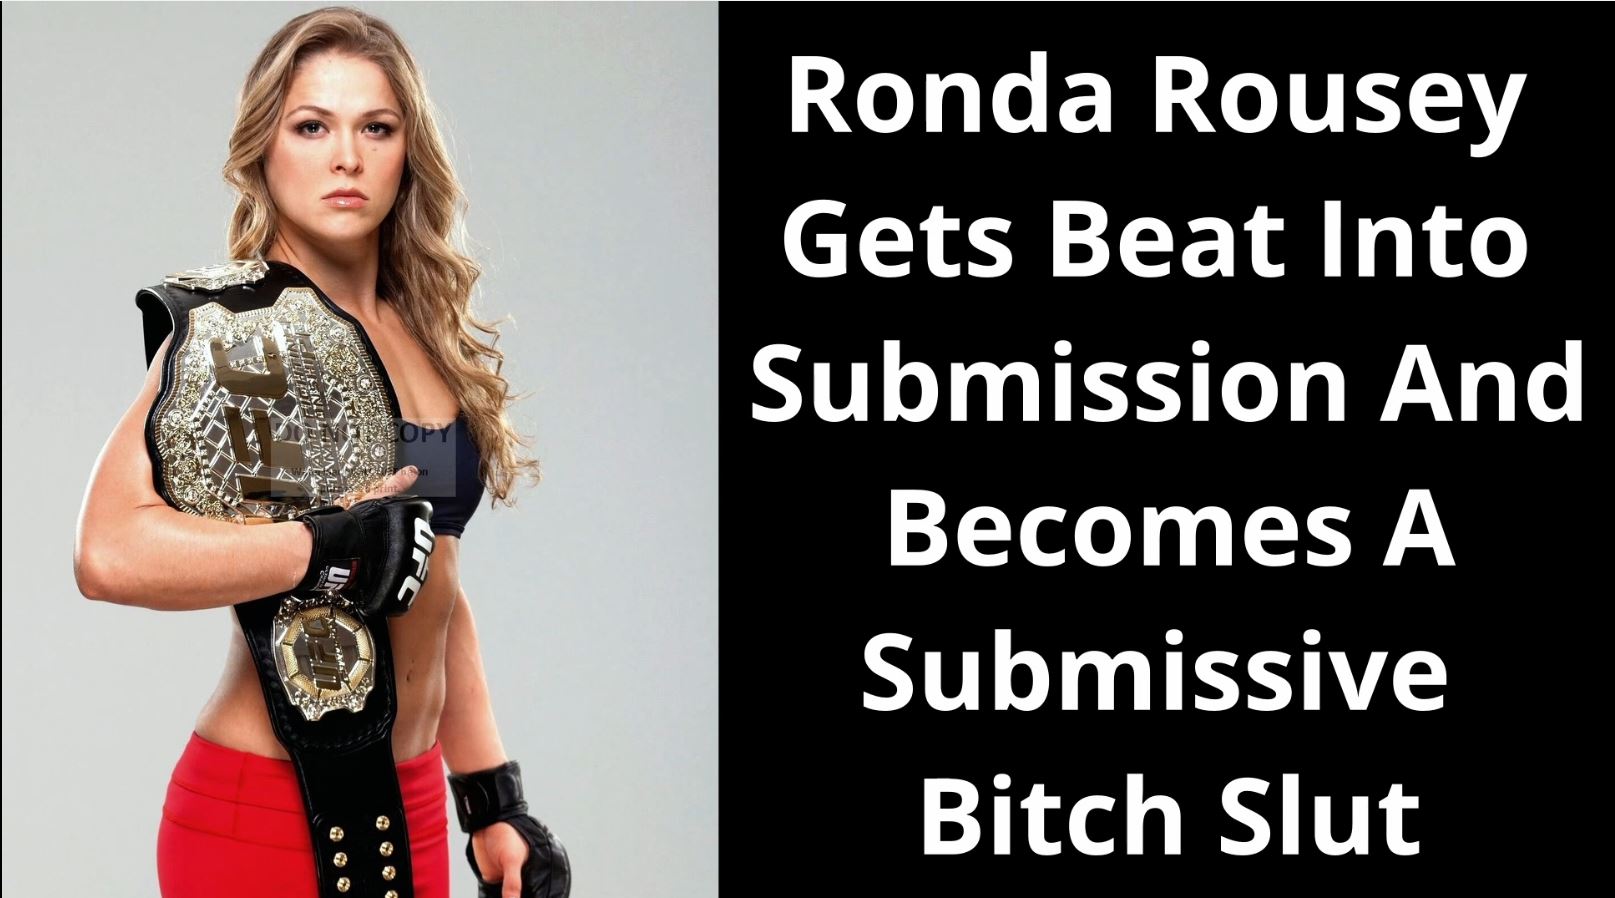 Ronda Rousey Beat Into Submission